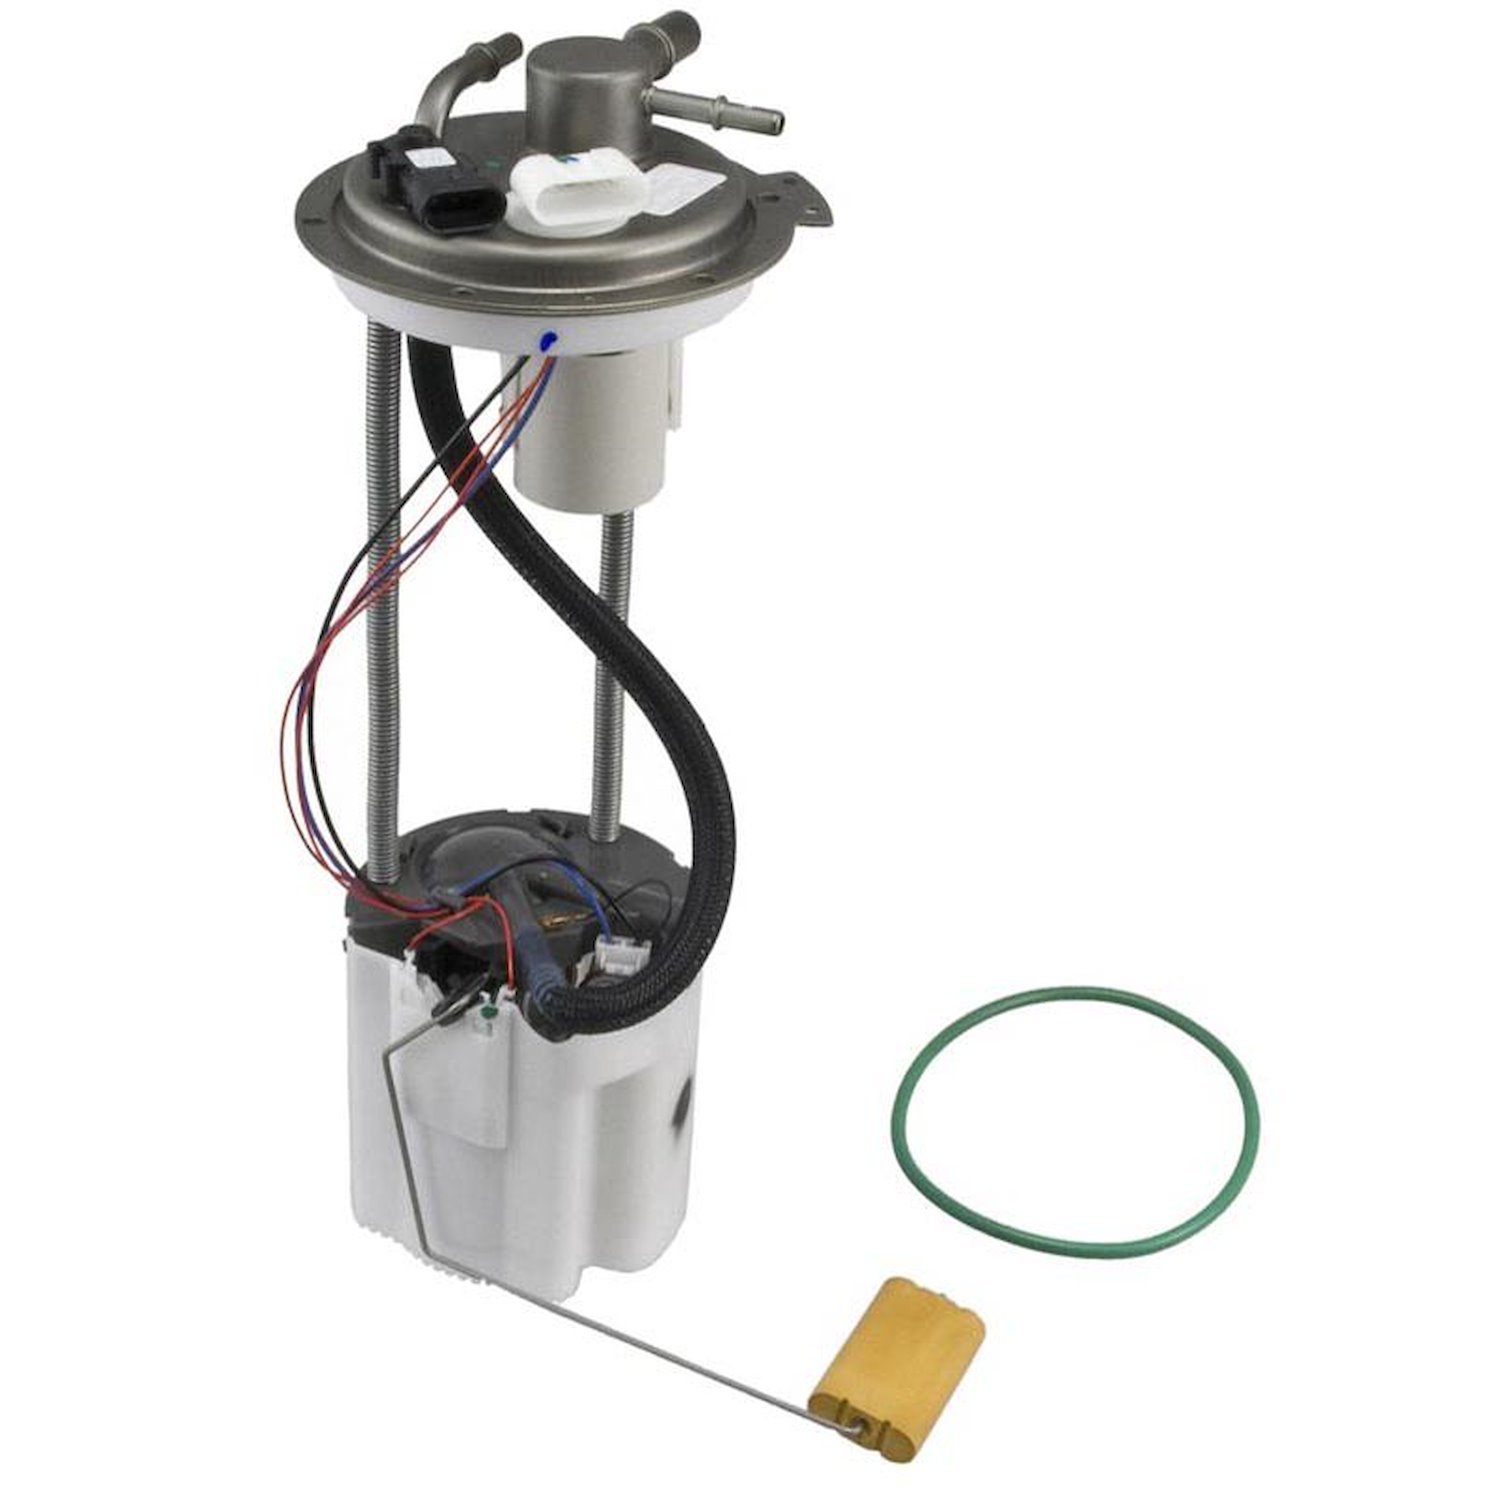 OE GM Replacement Electric Fuel Pump Module Assembly for 2007-2008 Chevy Silverado/GMC Sierra 1500